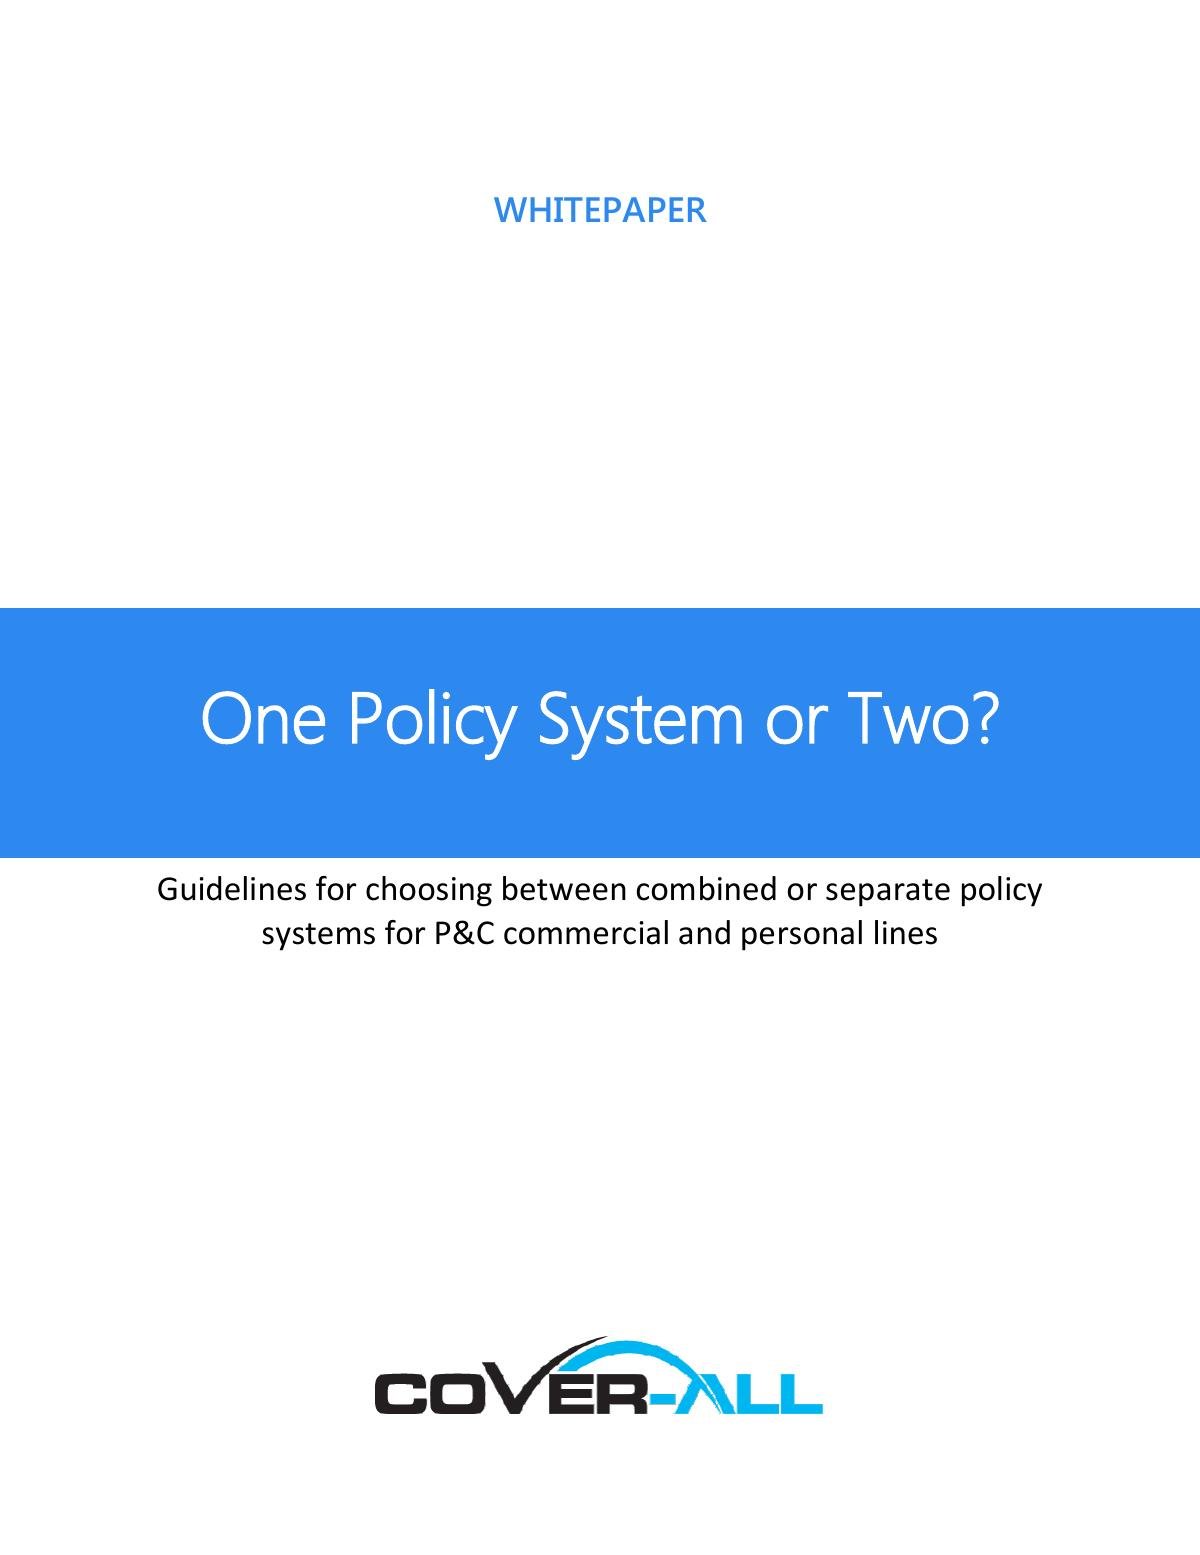 One Policy System or Two?